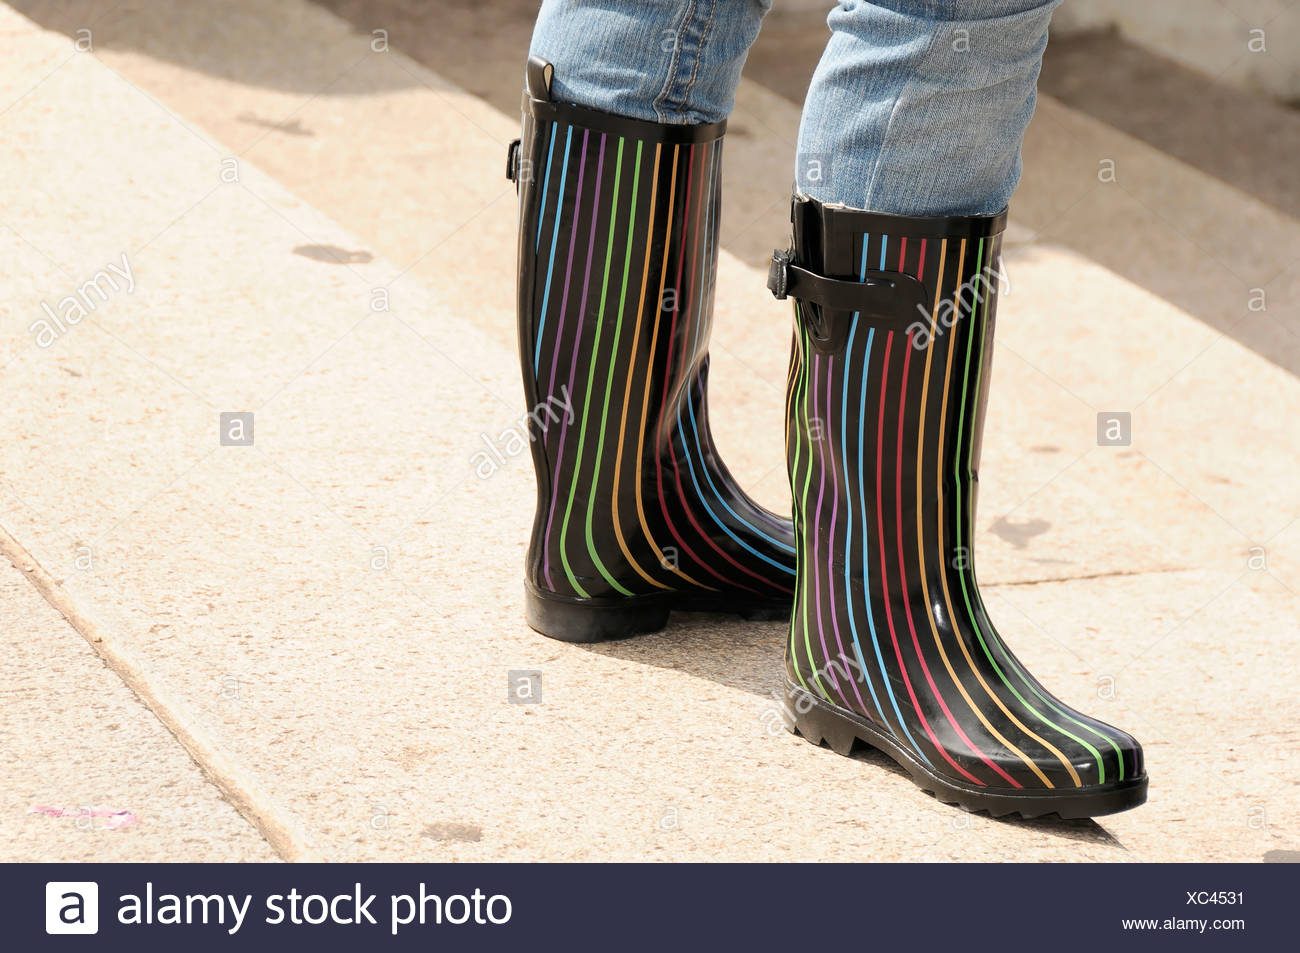 rubber boots london